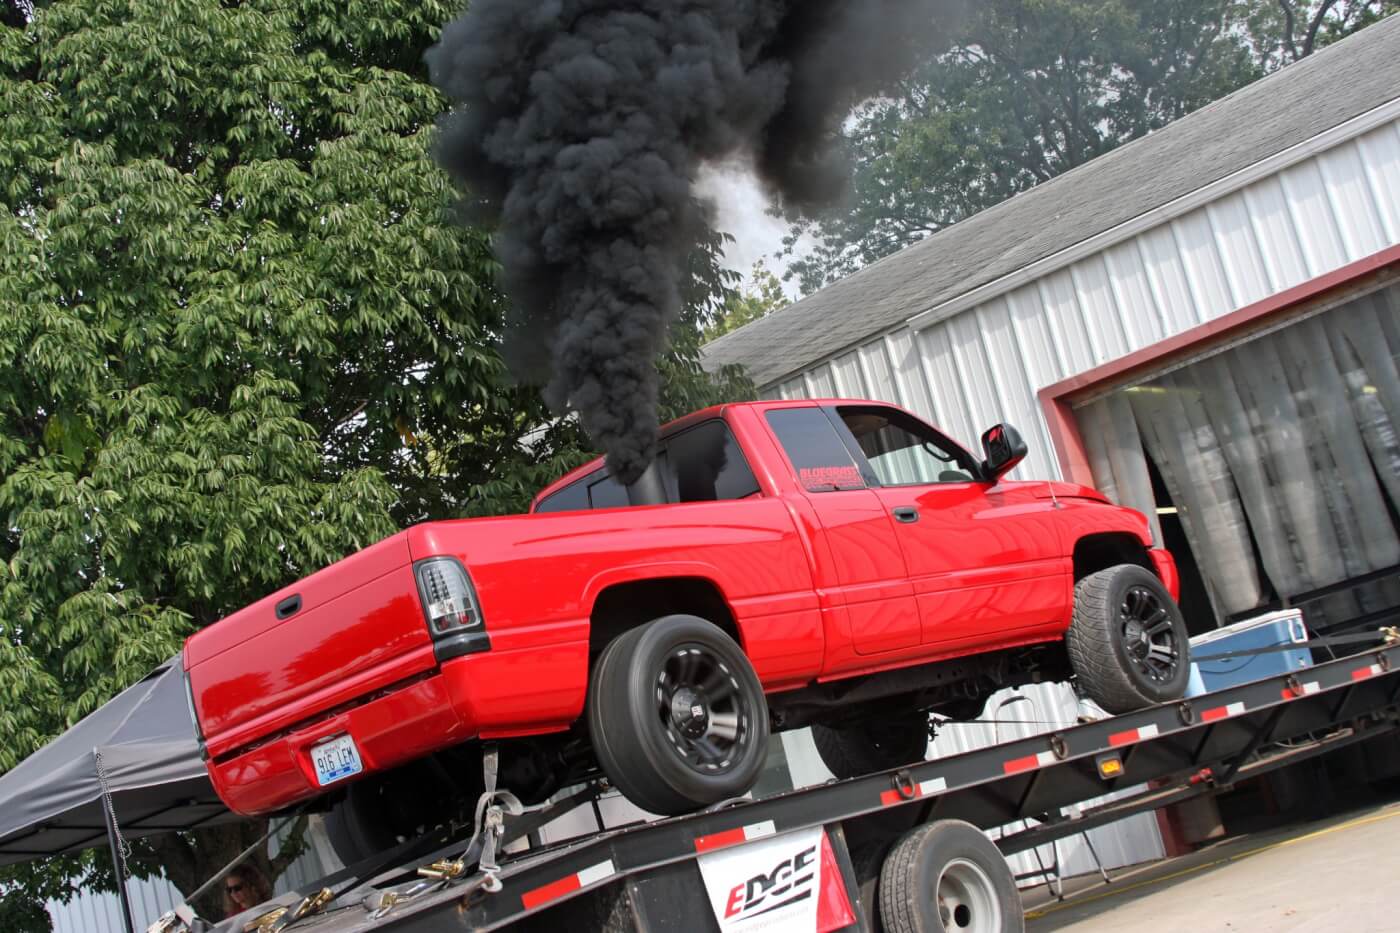 Chaz Giles’ bright red Dodge rocked the dyno rollers with over 1,100 horsepower Friday afternoon.